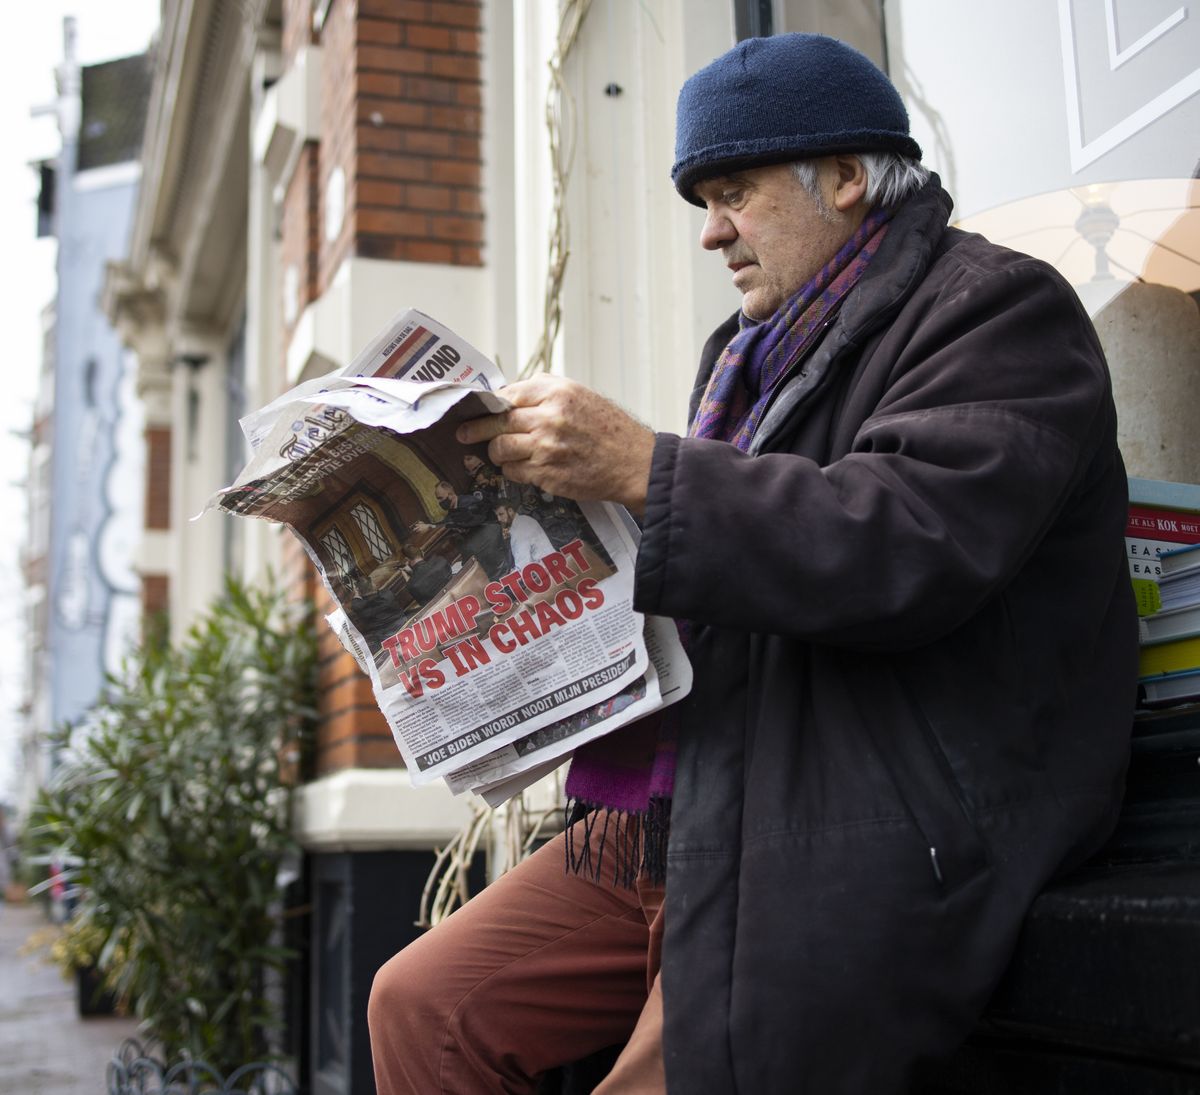 A man reads a newspaper with a headline reading "Trump Plunges U.S. into Chaos" outside a takeaway cafe in the center of Amsterdam, Netherlands, Thursday, Jan. 7, 2021. Congress confirmed Democrat Joe Biden as the presidential election winner early Thursday after a violent mob loyal to President Donald Trump stormed the U.S. Capitol in a stunning attempt to overturn America